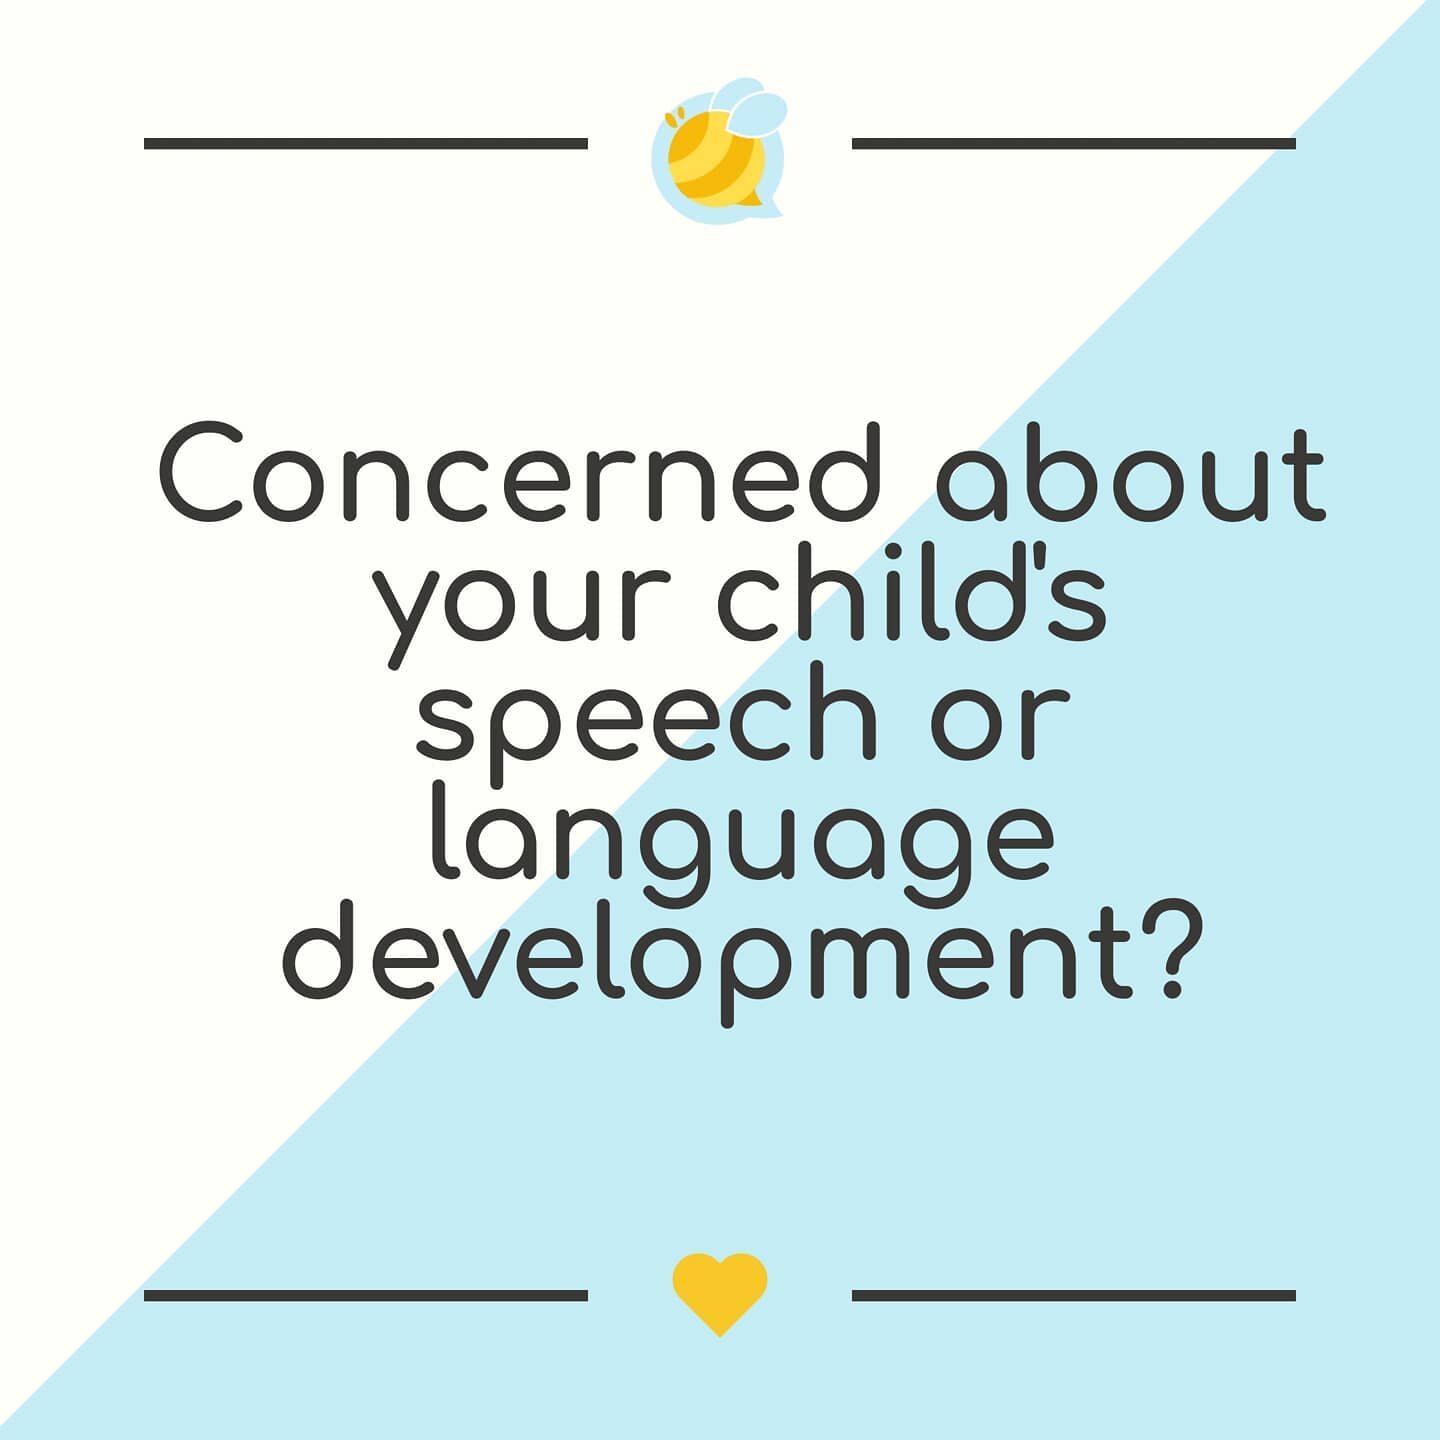 The ages of birth-5 are a critical period of development for young children. During the COVID-19 pandemic, healthcare appointments for infants and children have dropped by 70-80%.

If you are concerned about your child's speech or language developmen